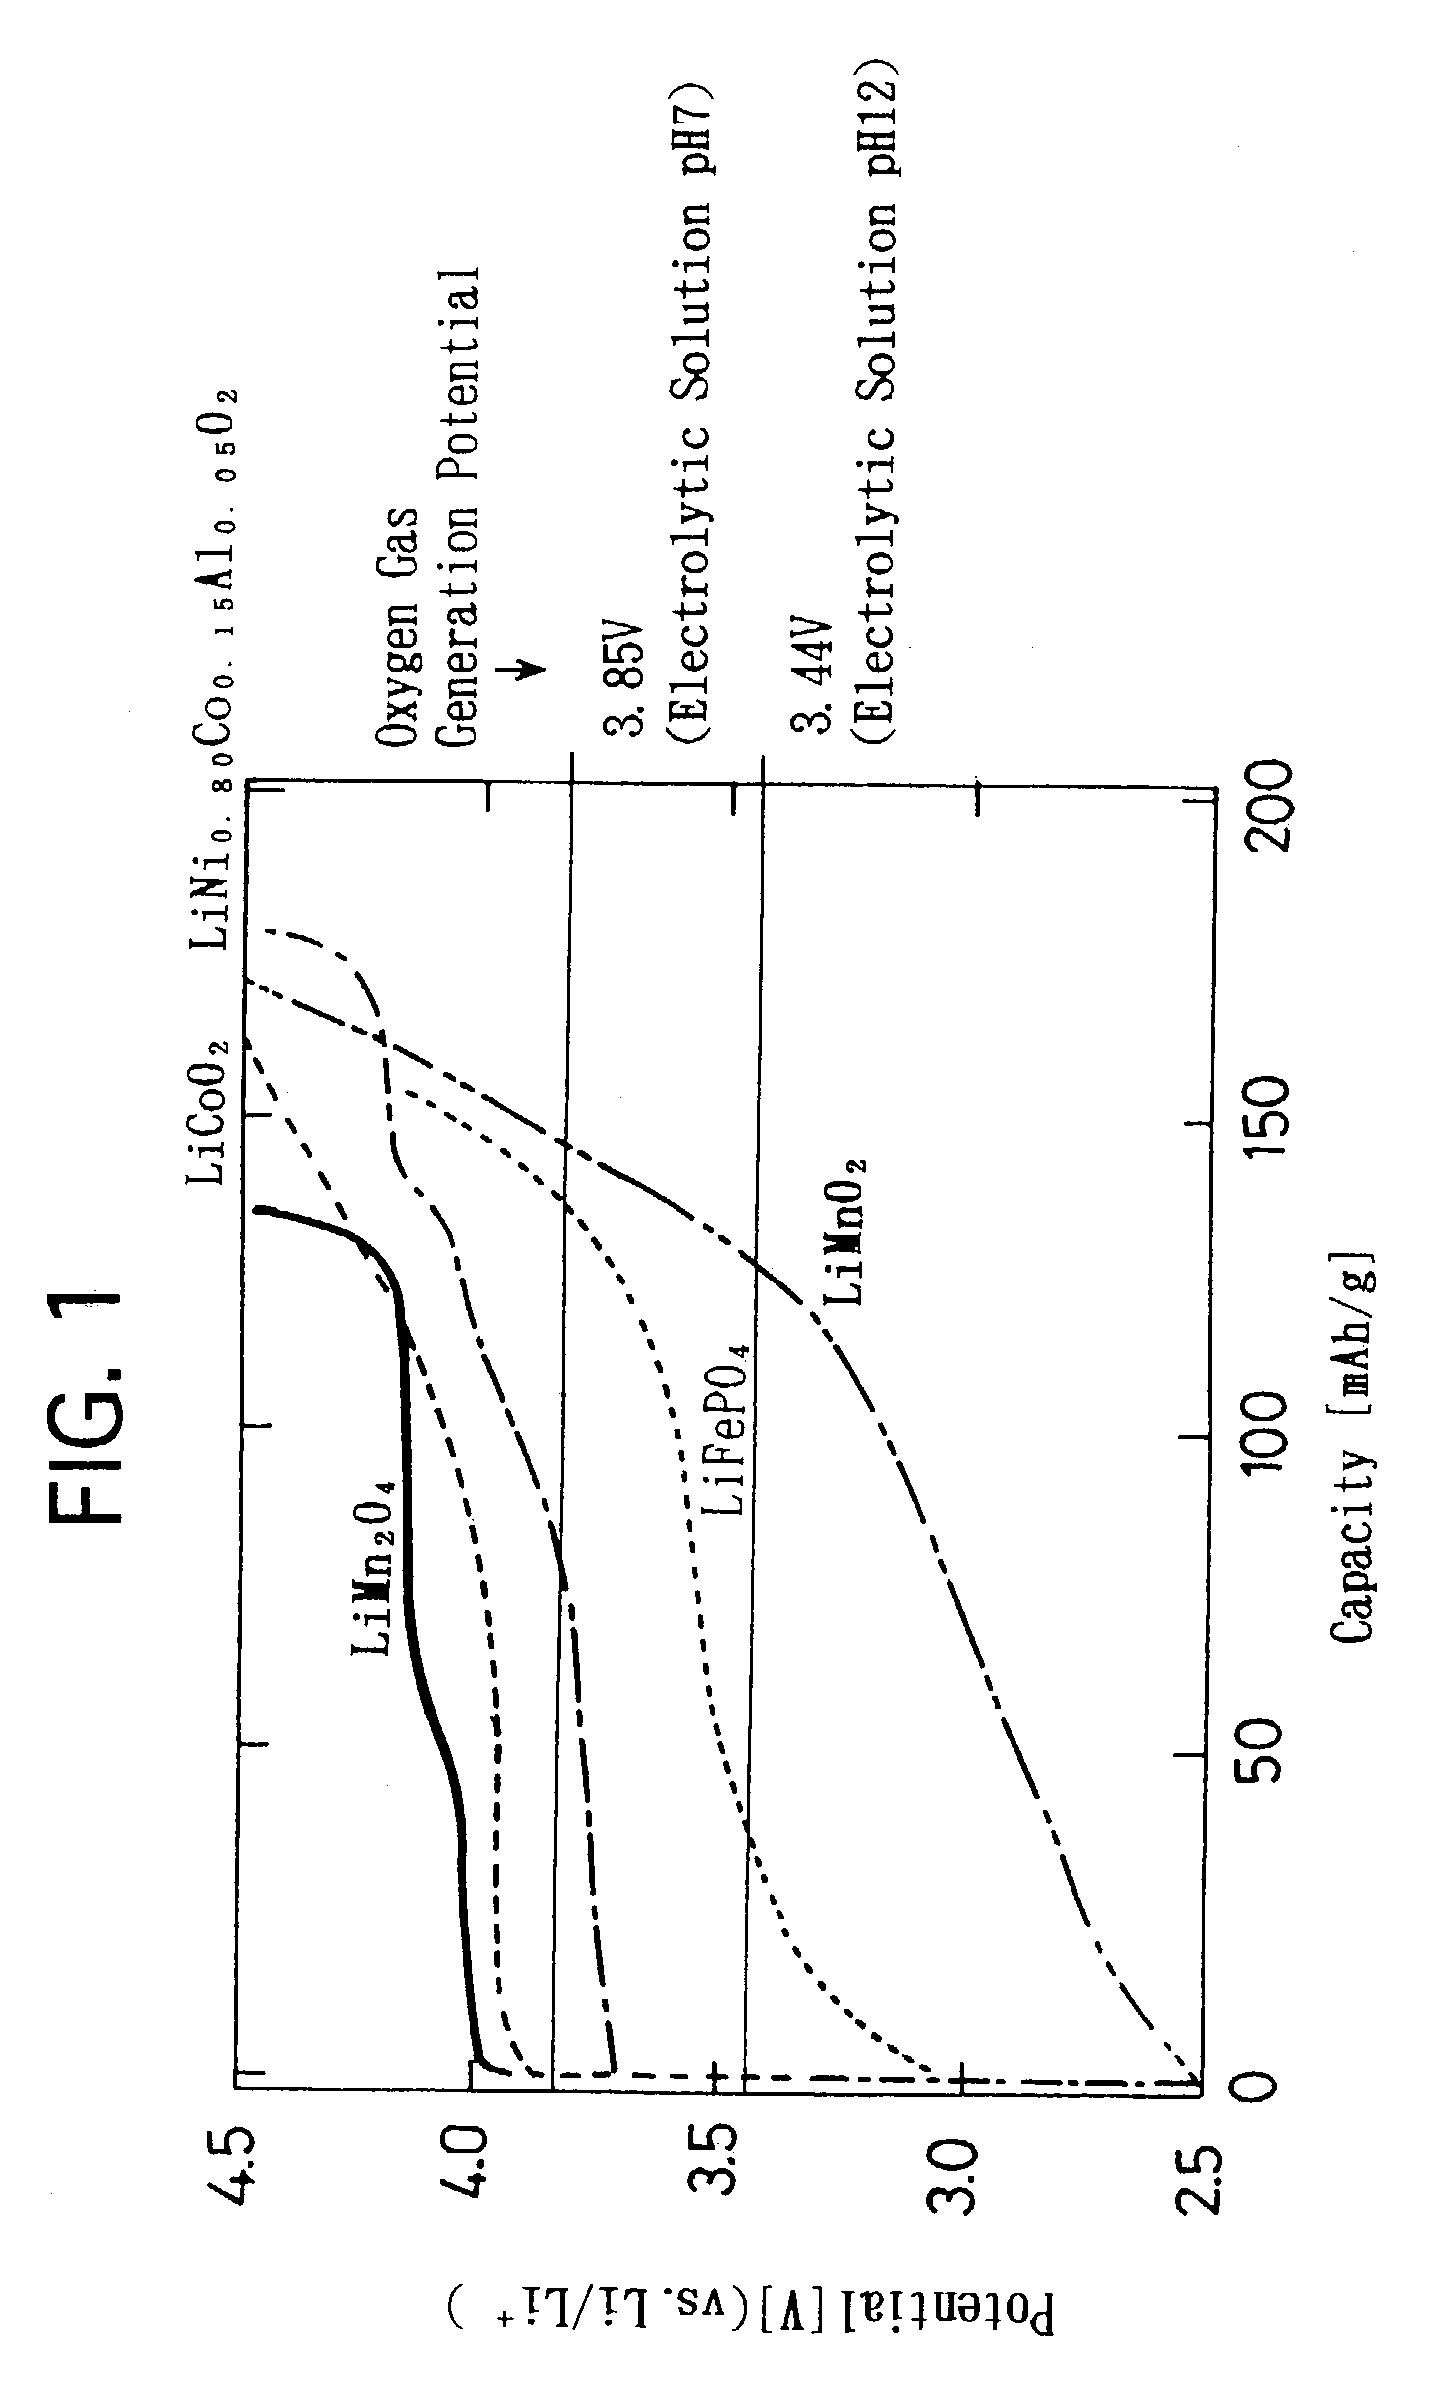 Lithium secondary battery